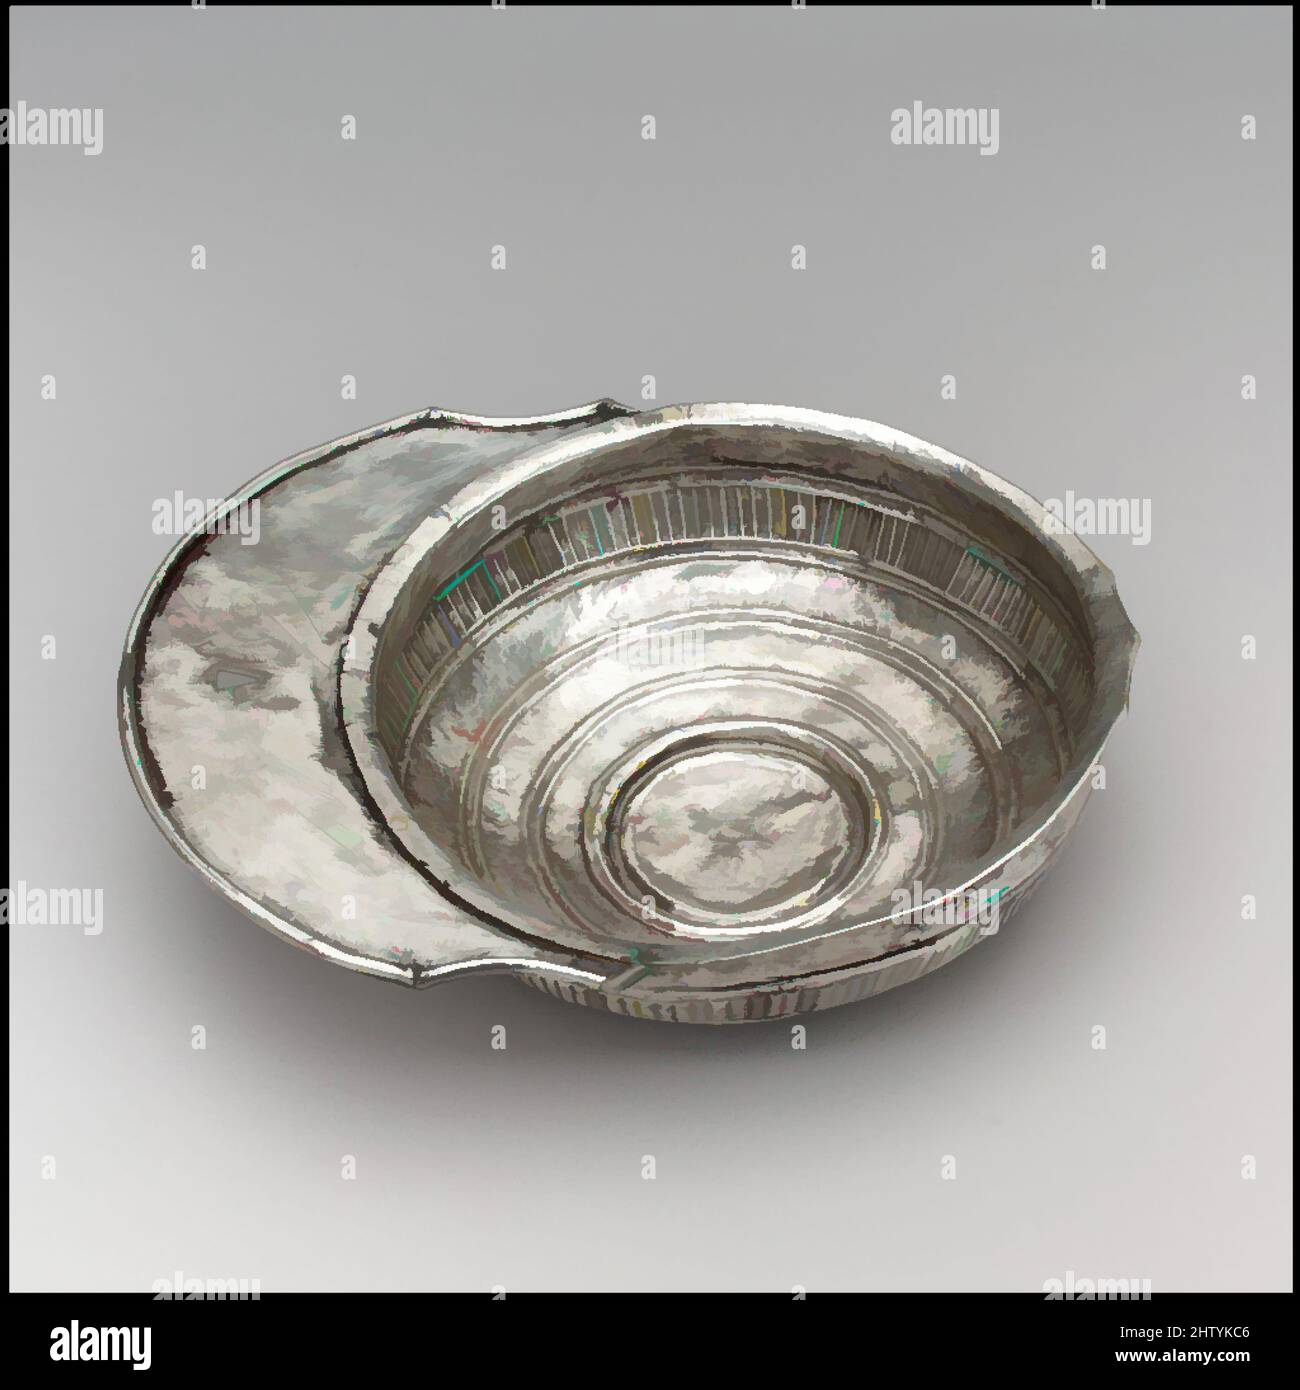 Art inspired by Silver Drinking Bowl with Handle, 700s, Made in Tirana, Avar, Silver, 2 × 9 15/16 × 7 5/16 in., 9 Troy Ounces (5.1 × 25.2 × 18.5 cm, 299g), Metalwork-Silver, The Avars were a nomadic tribe of mounted warriors from the Eurasian steppe. The Byzantine emperor Justinian, Classic works modernized by Artotop with a splash of modernity. Shapes, color and value, eye-catching visual impact on art. Emotions through freedom of artworks in a contemporary way. A timeless message pursuing a wildly creative new direction. Artists turning to the digital medium and creating the Artotop NFT Stock Photo